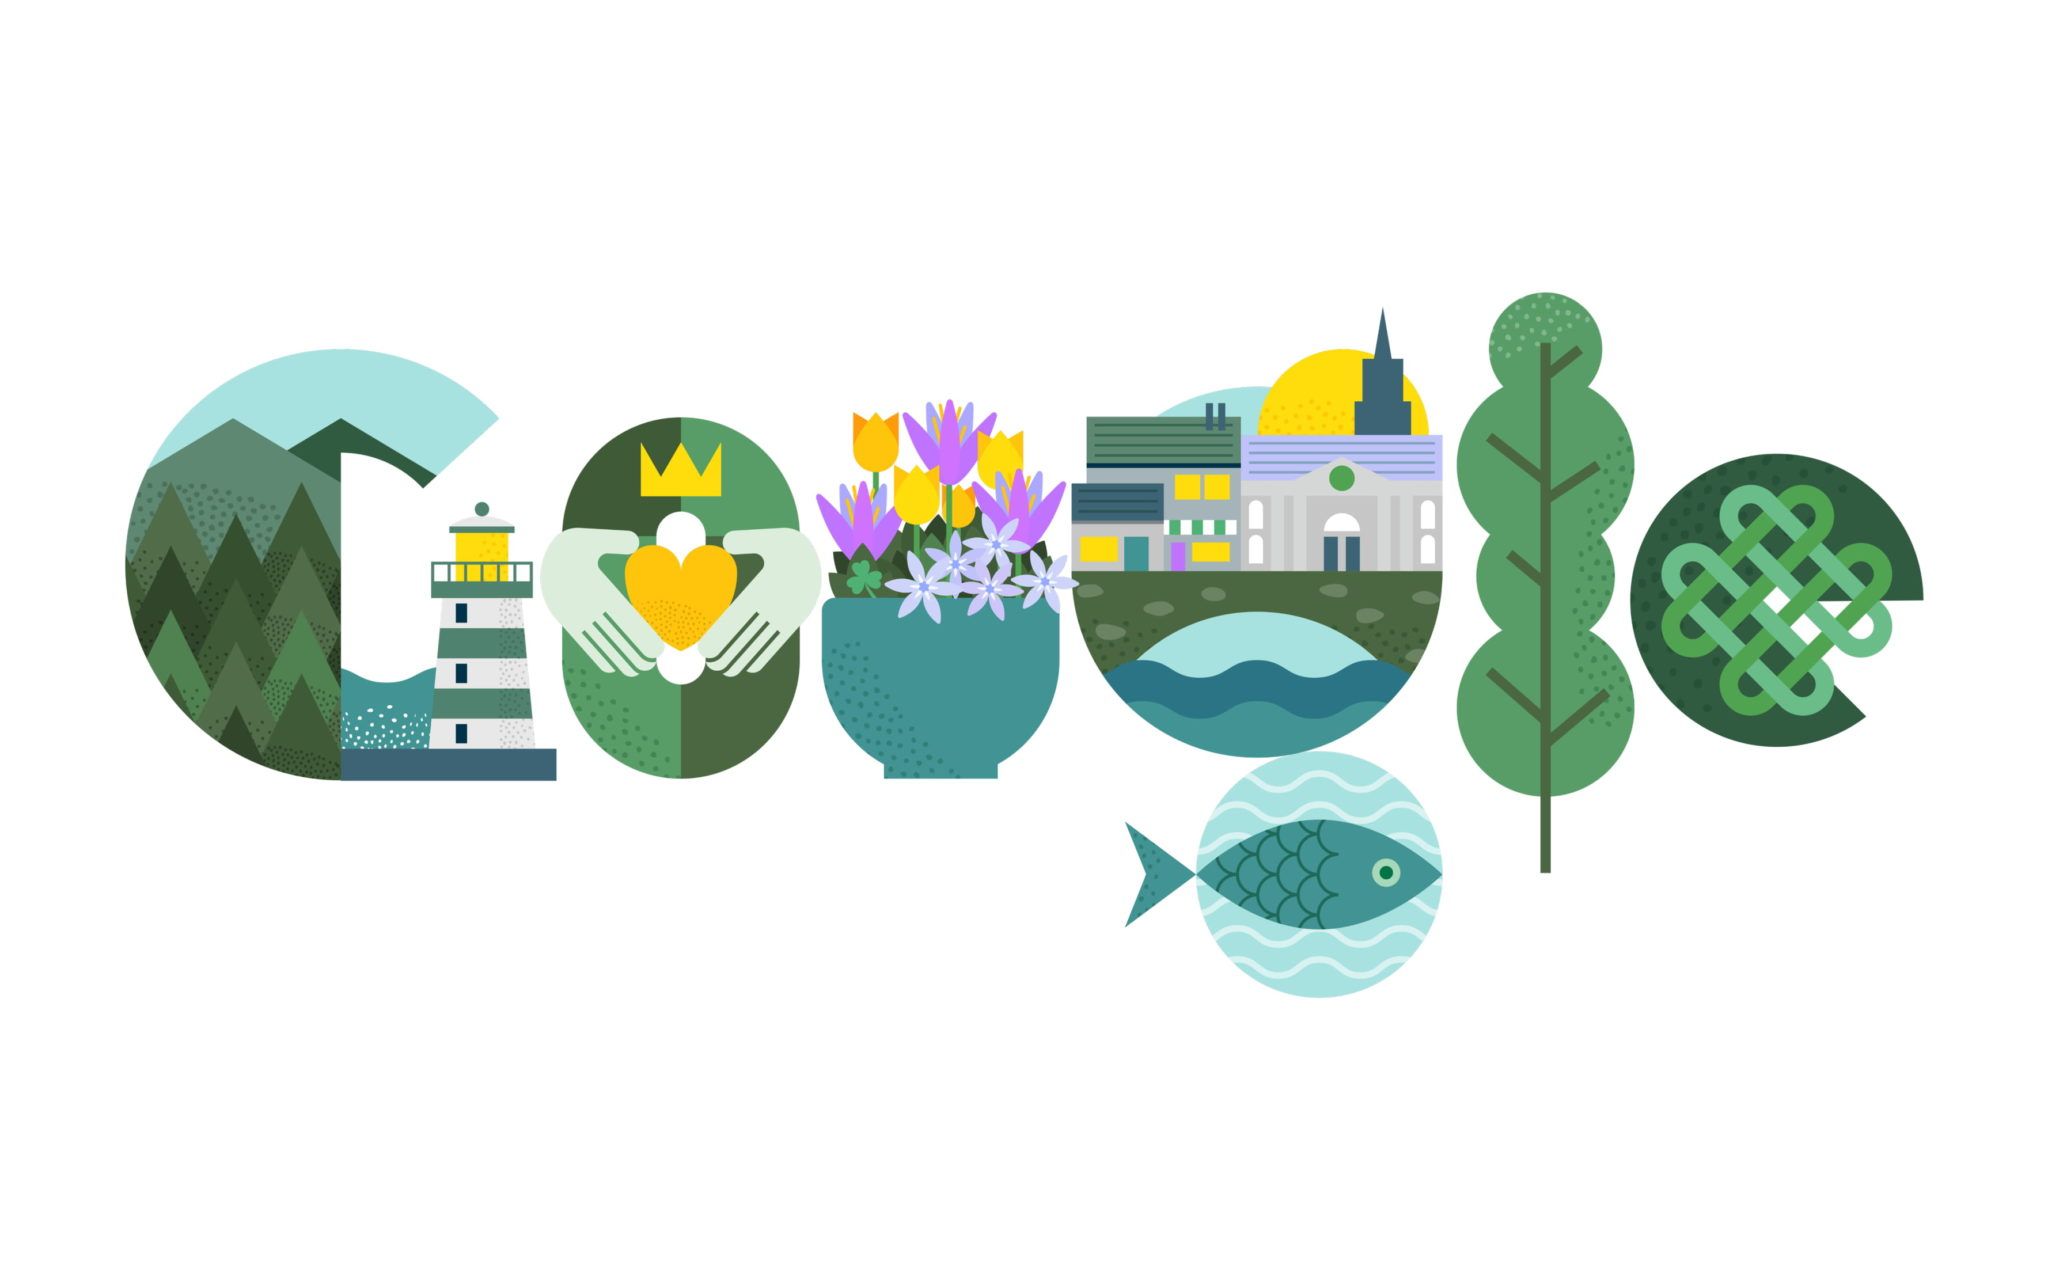 Google unveil new Doodle designed by an Irish artist for St. Patrick's Day